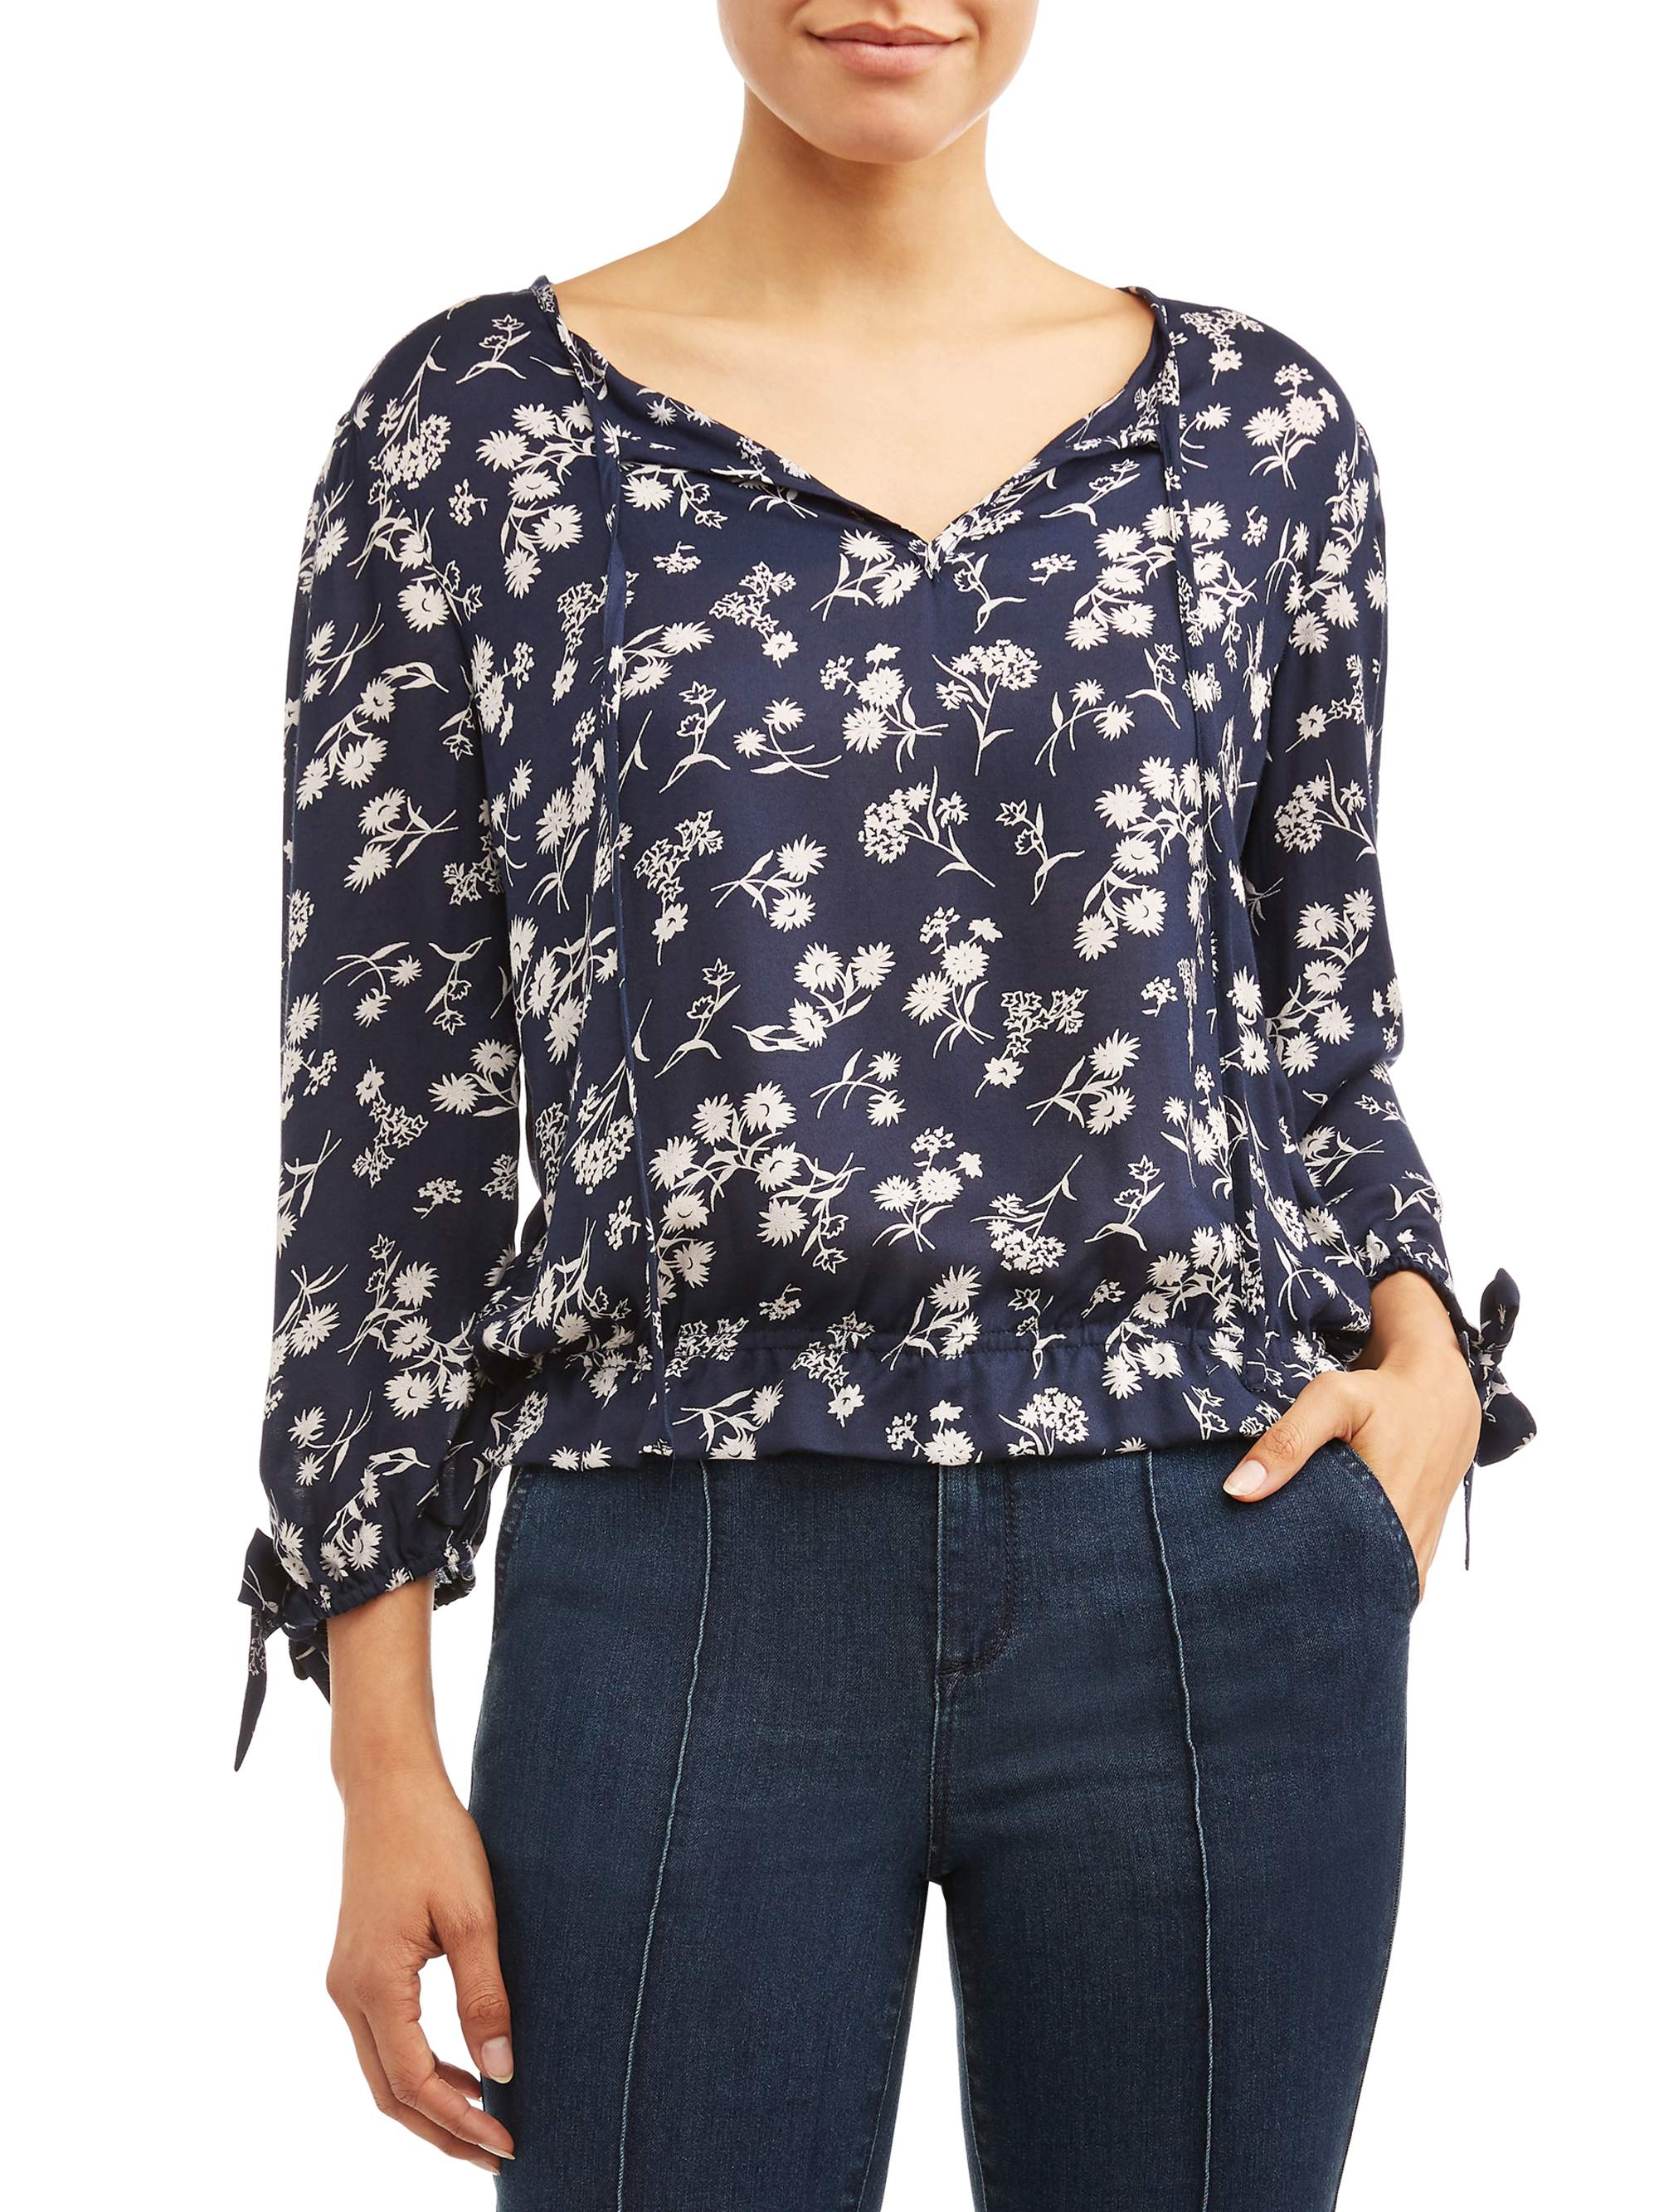 Sofia Jeans 3/4 Length Sleeve Woven Peasant Blouse Women's (Floral Print) - image 1 of 9